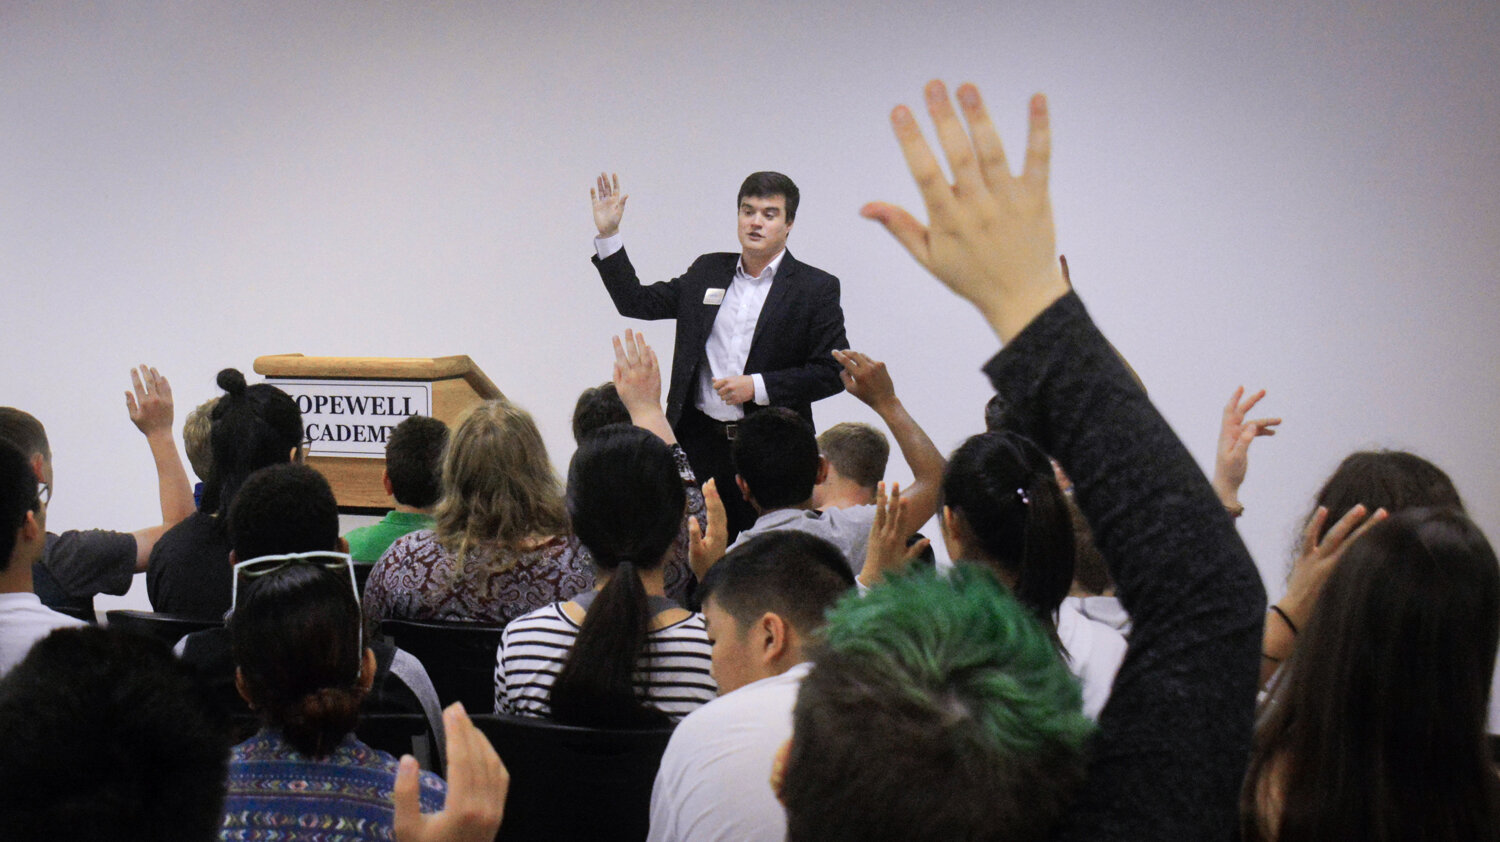  May 29, 2018 Ryan speaks to students about participation in government Cary, NC 